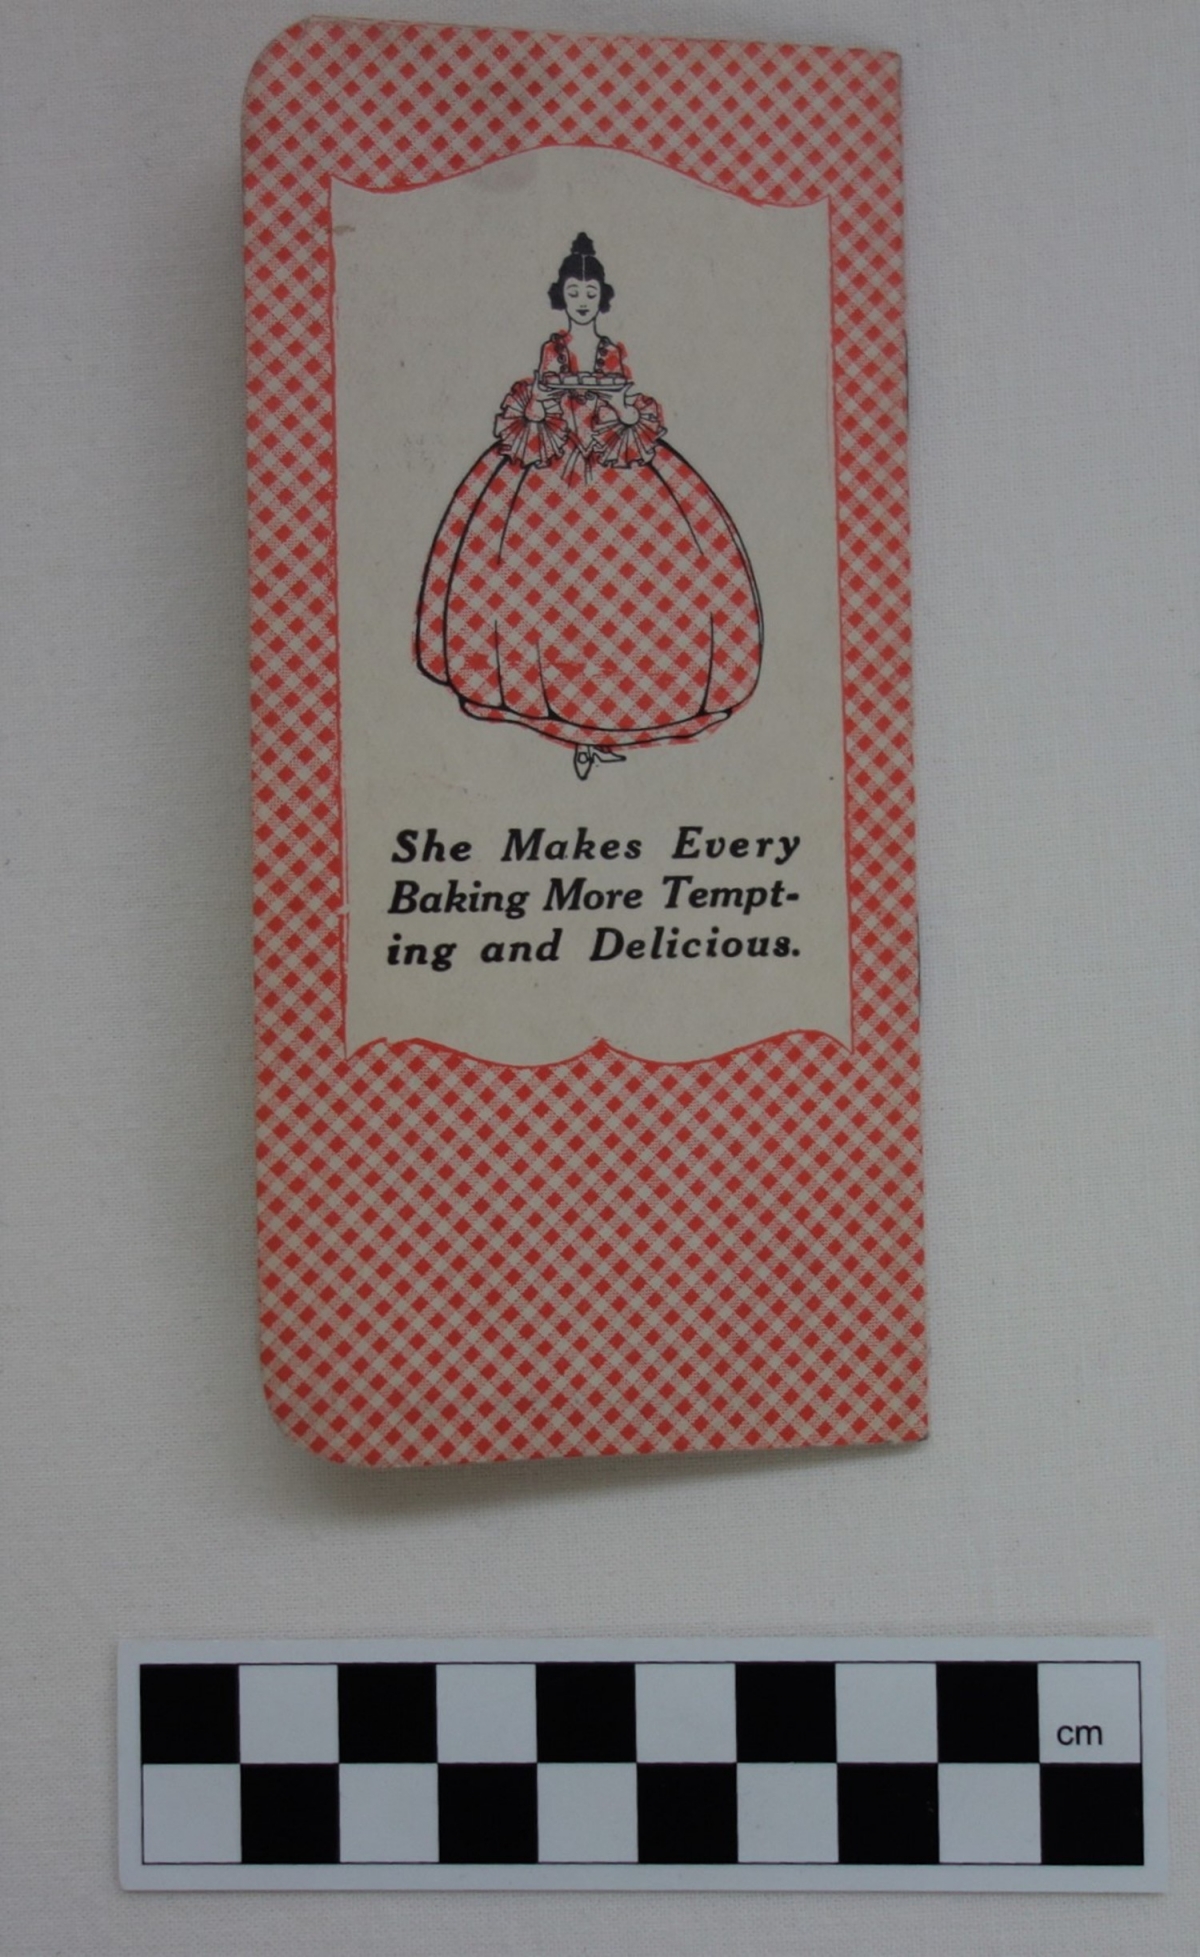 Small notebook made especially by the Gingham Girl Flour company, USA, c. 1925.